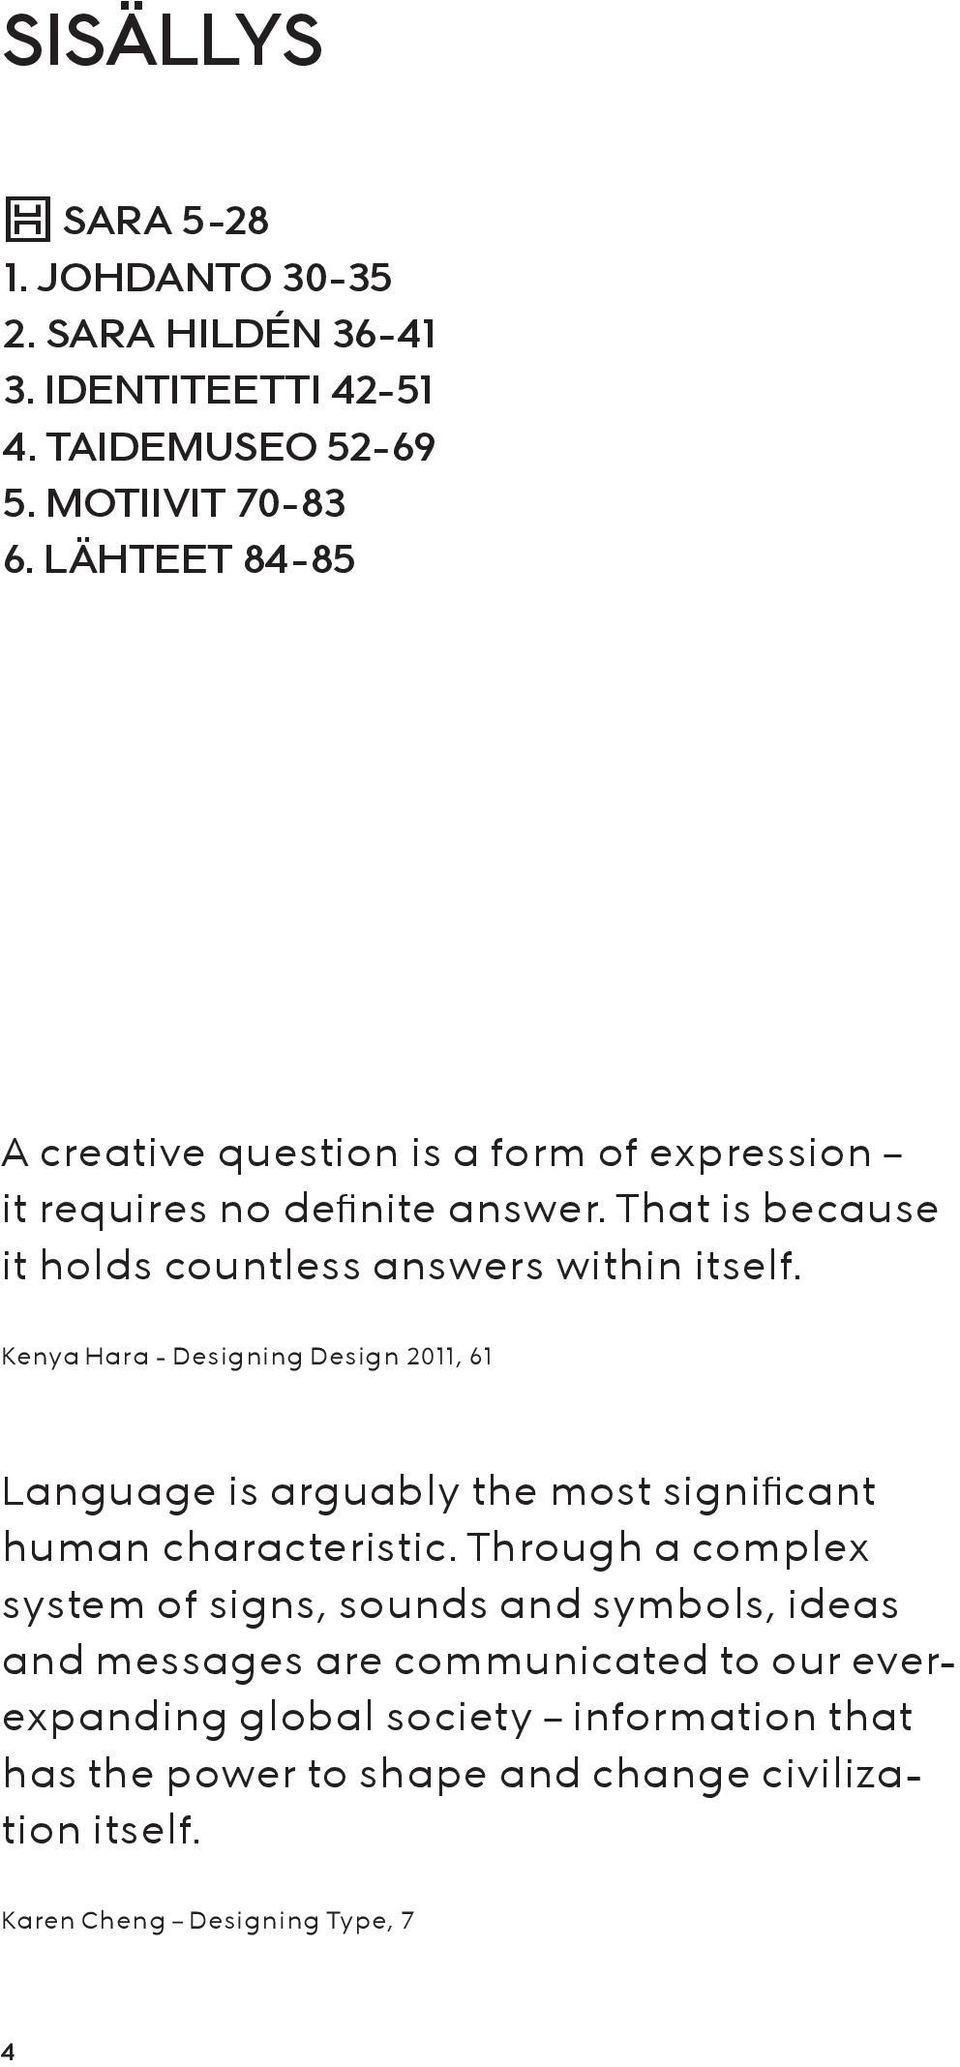 Kenya Hara - Designing Design 2011, 61 Language is arguably the most significant human characteristic.